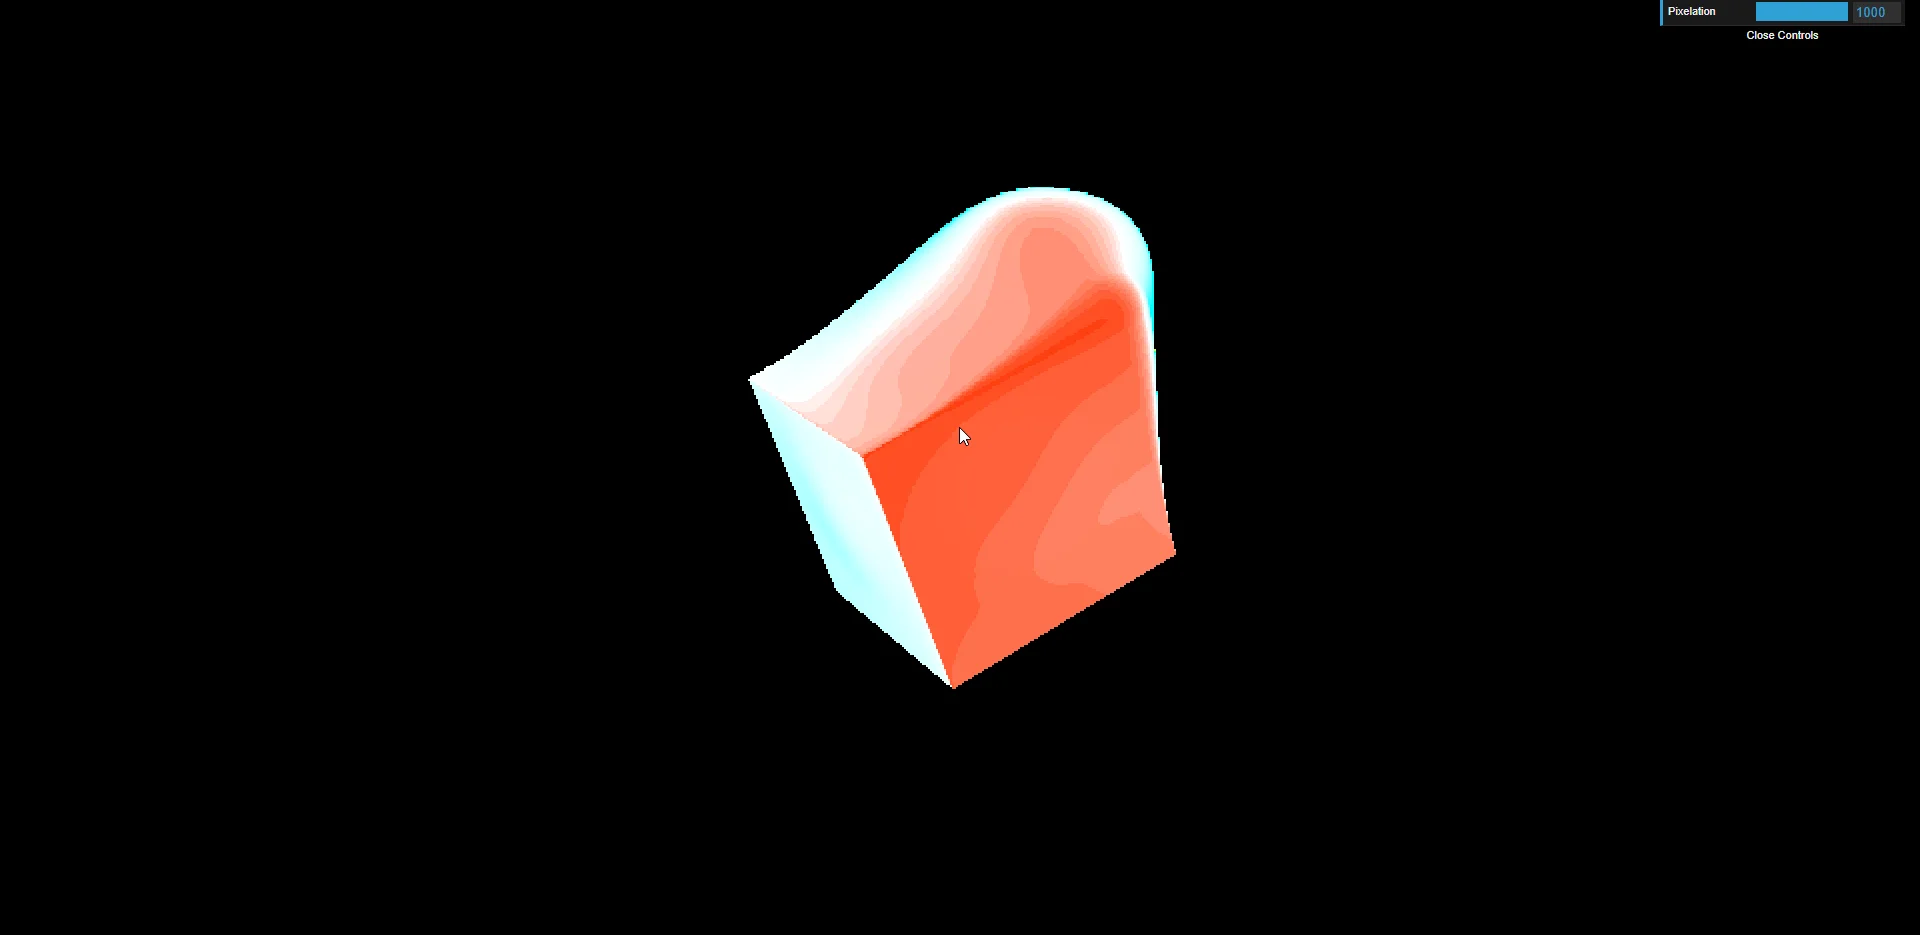 The Ray Marching demo utilizing GLSL fragment shaders